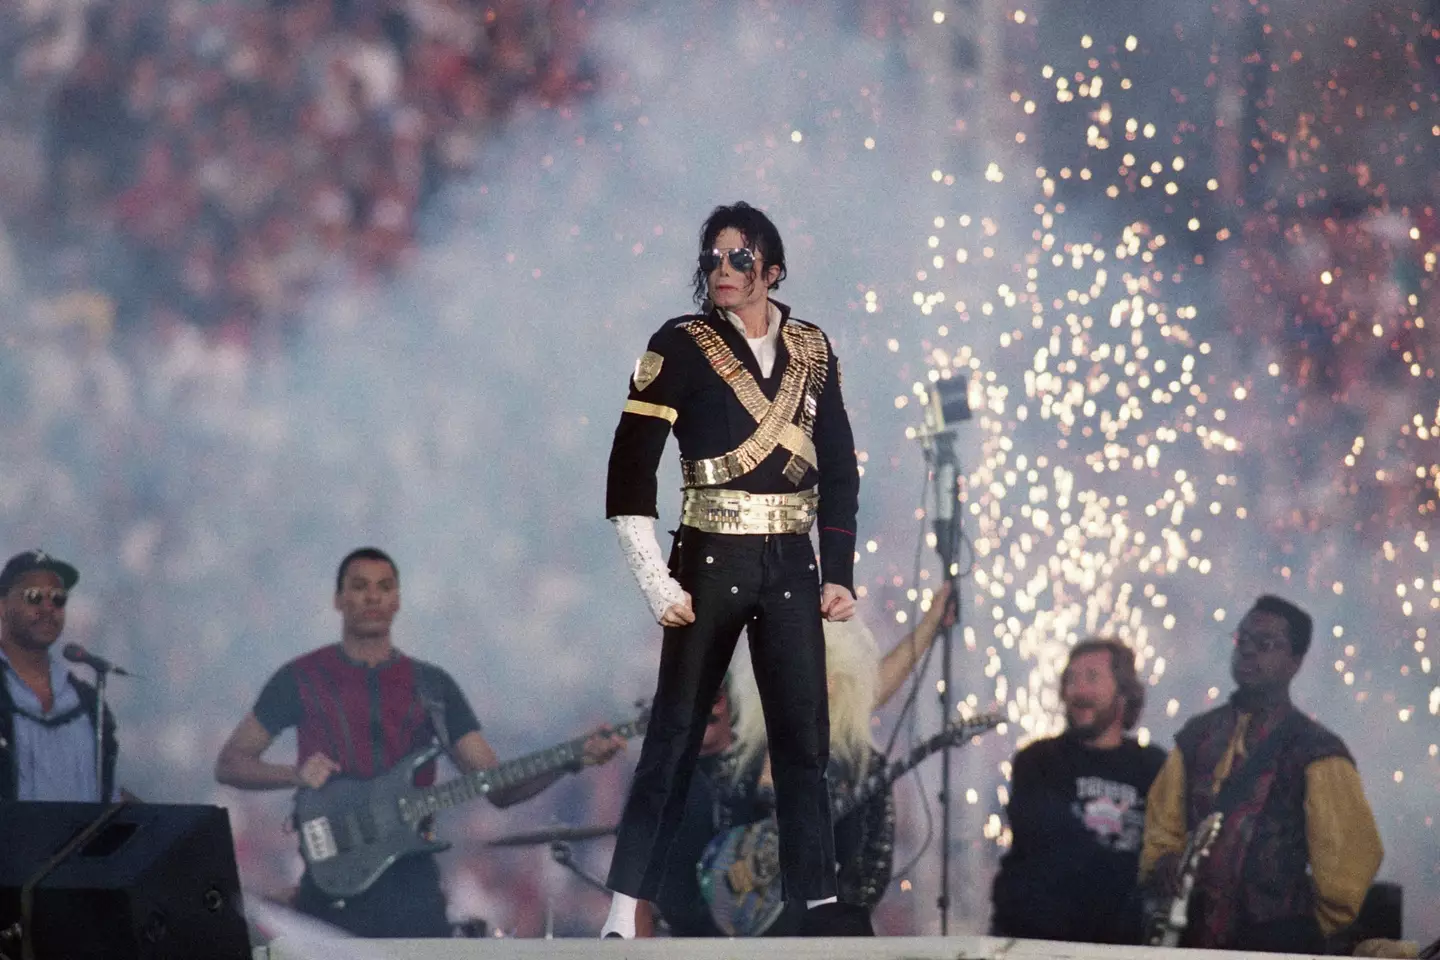 Jackson's executors worked to get the estate in a better position. (Steve Granitz/WireImage)